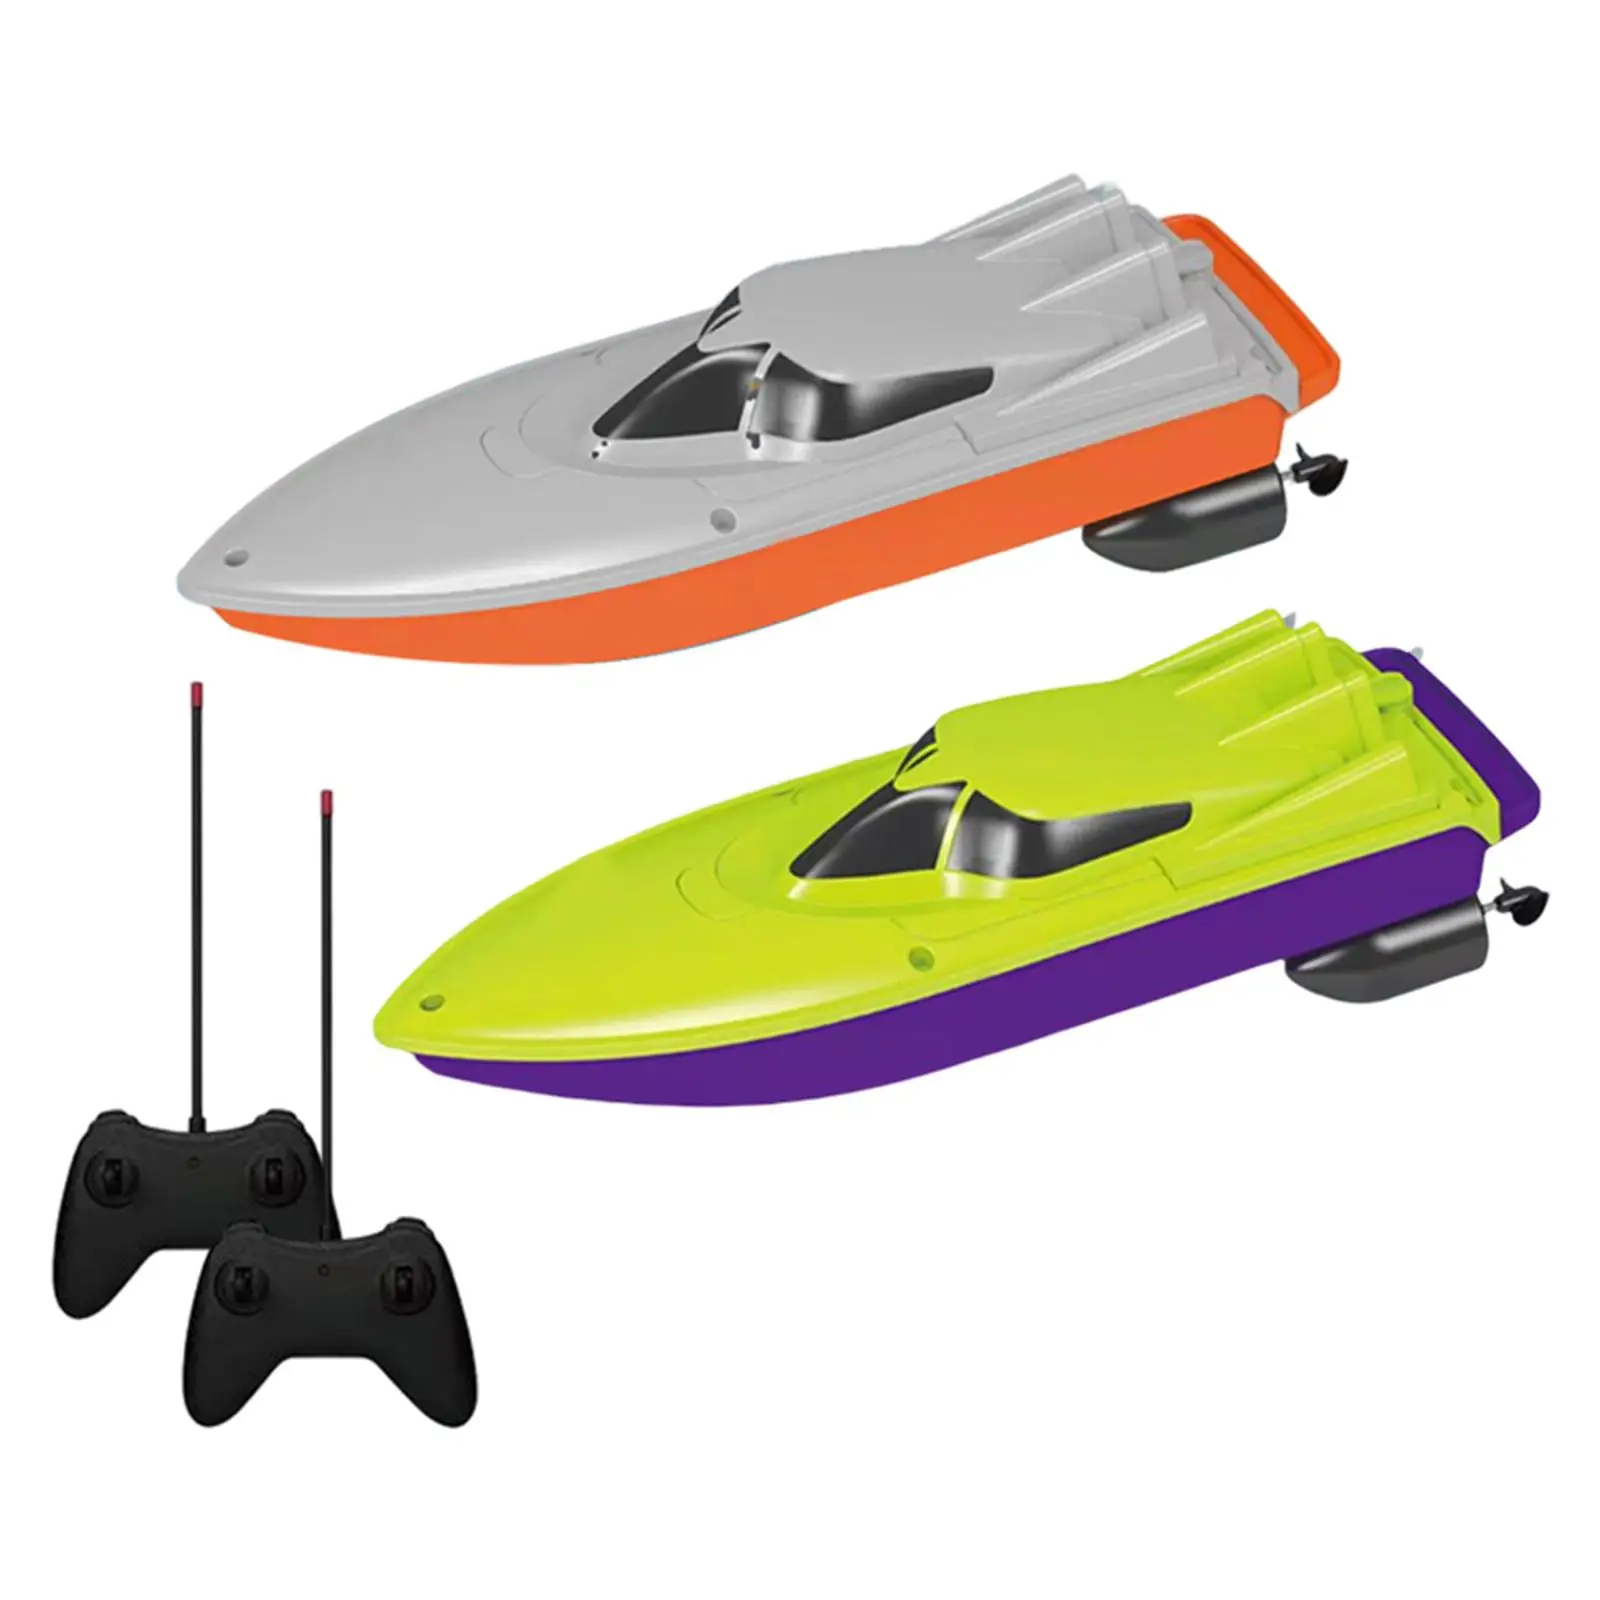 RC Boat Double Motor High RC Race Boat 10km/H for River, Pools,